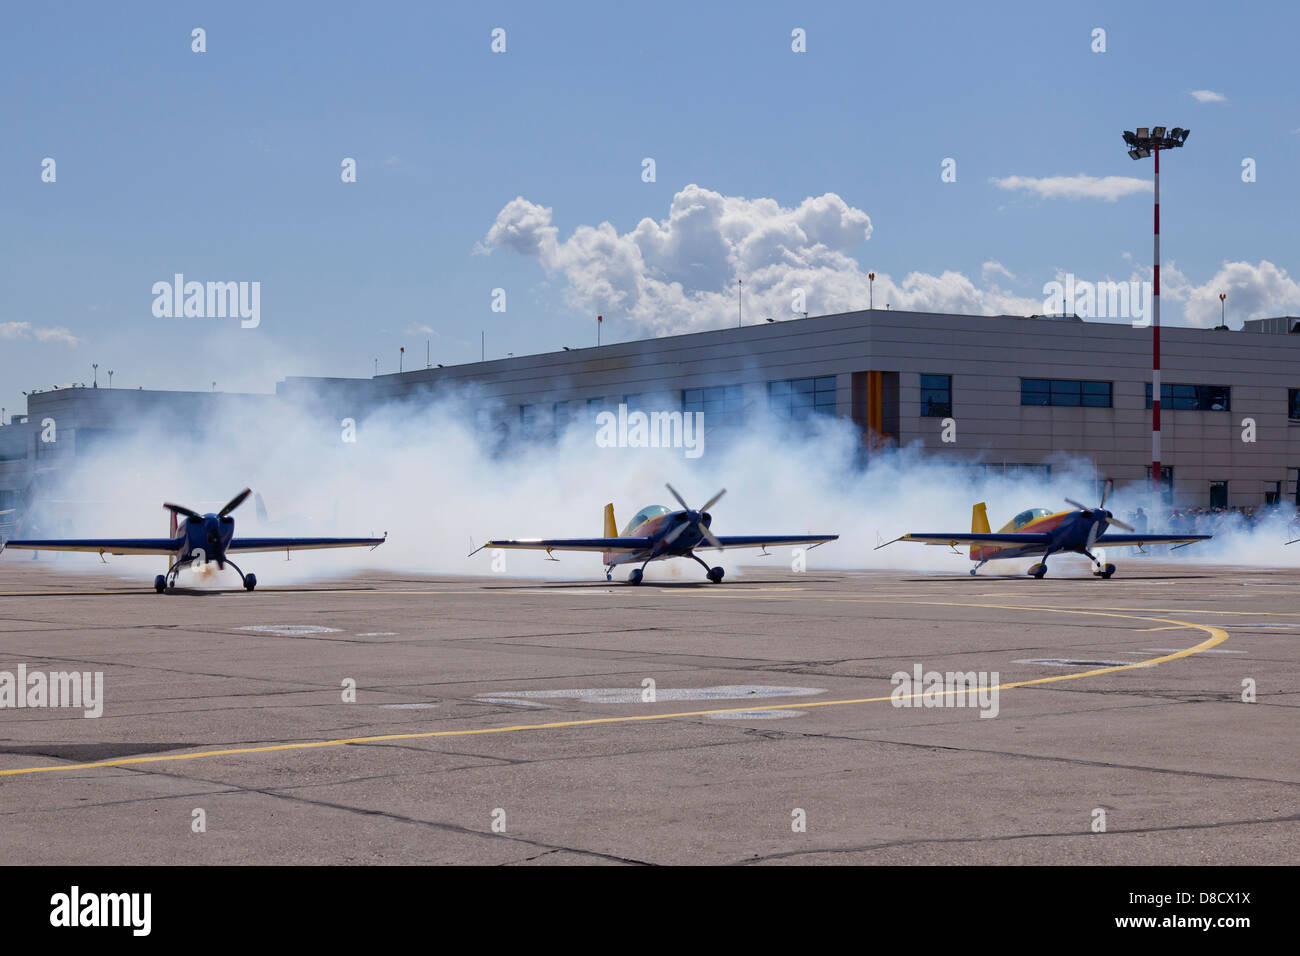 airplanes on the ground making a lot of smoke before taking off Stock Photo